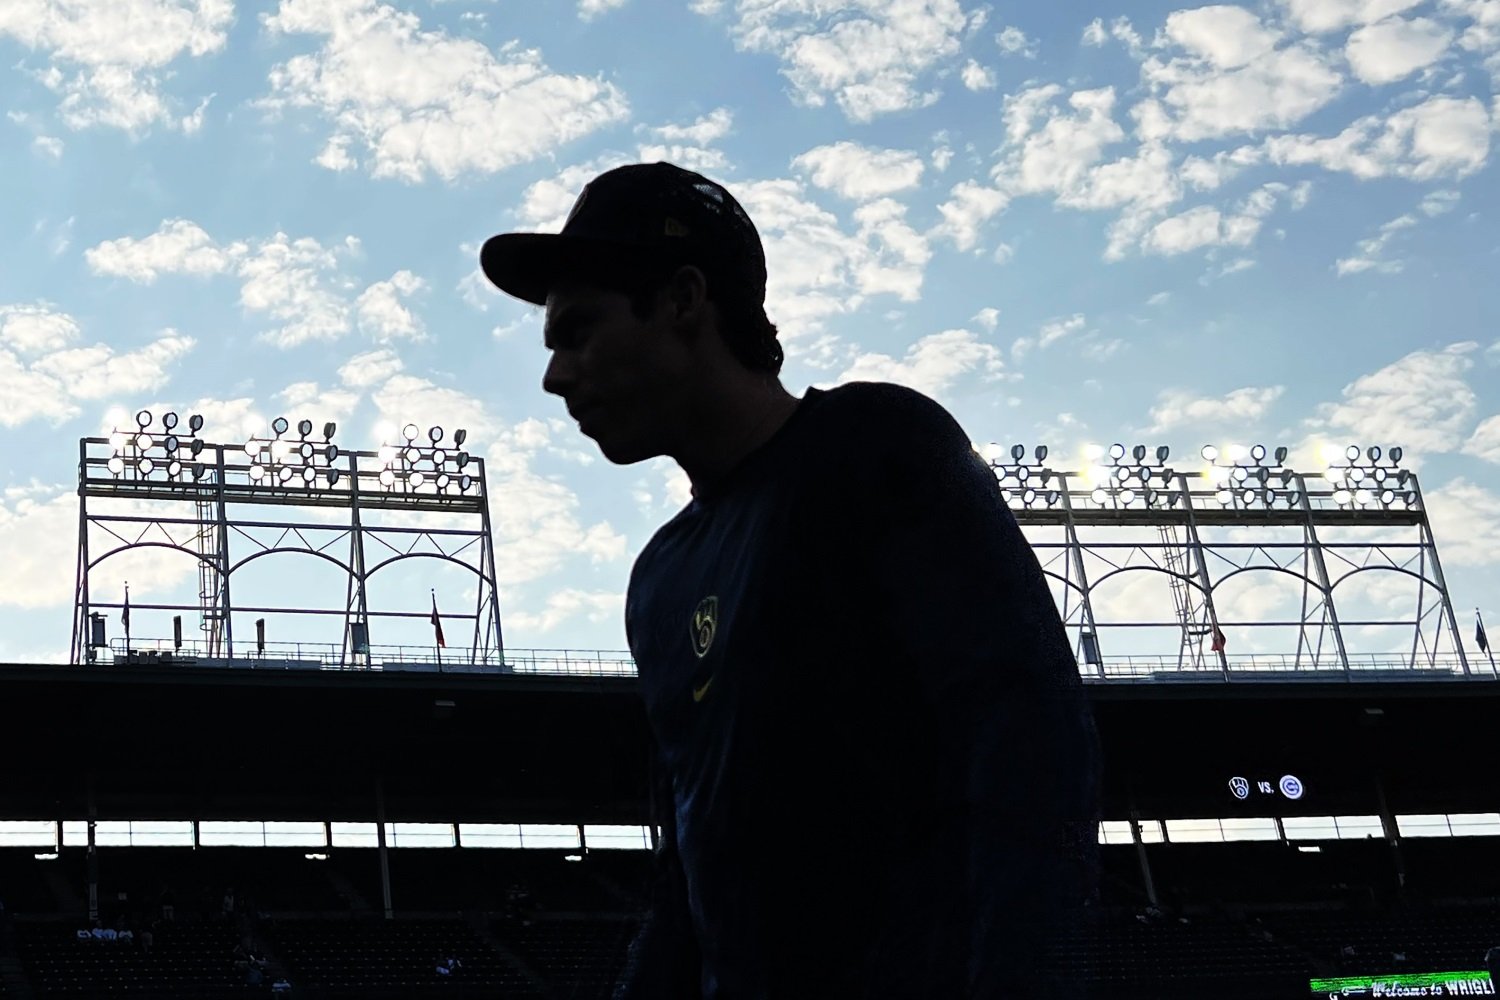 Brewers: Where has Christian Yelich's power gone? - Beyond the Box Score